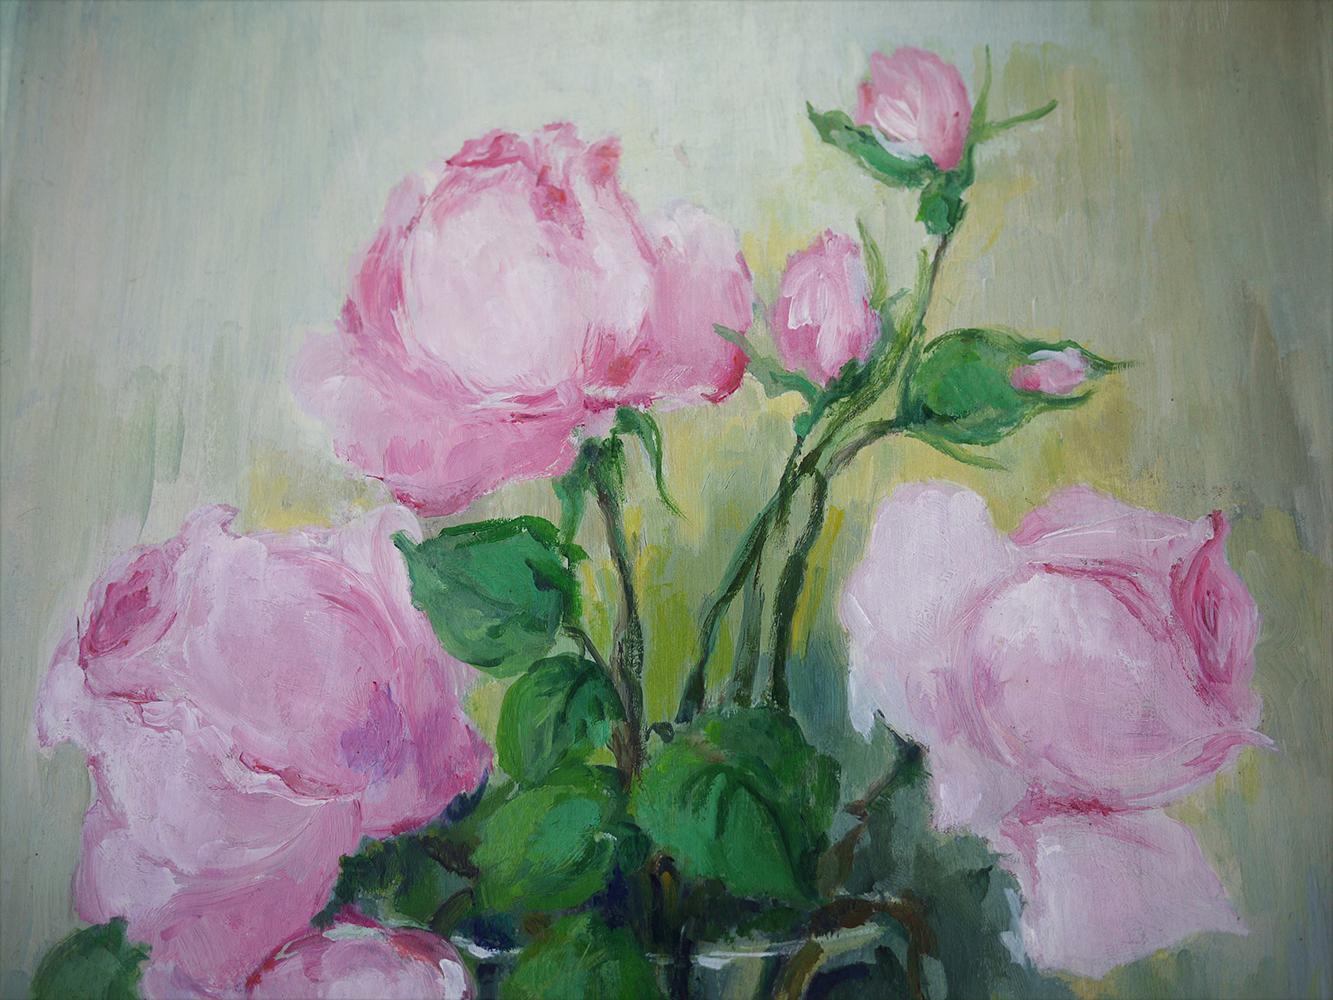 France, 1950
Measures:
50 cm x 35 cm (frame excluded)
19.7 in x 13.8 in (frame excluded)
oil on board

Painting depicting a glass vase containing pink roses
Antique fir frame.